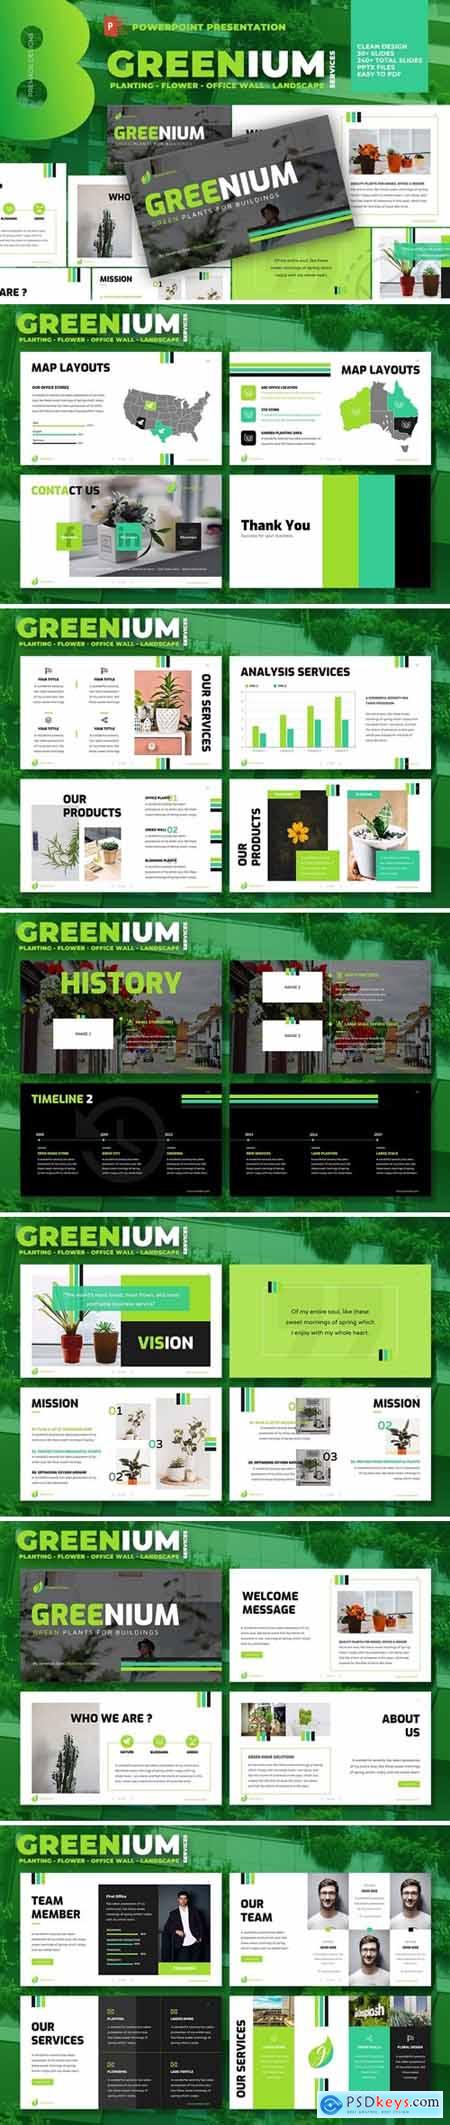 Greenium - Planting Services Powerpoint and Keynote